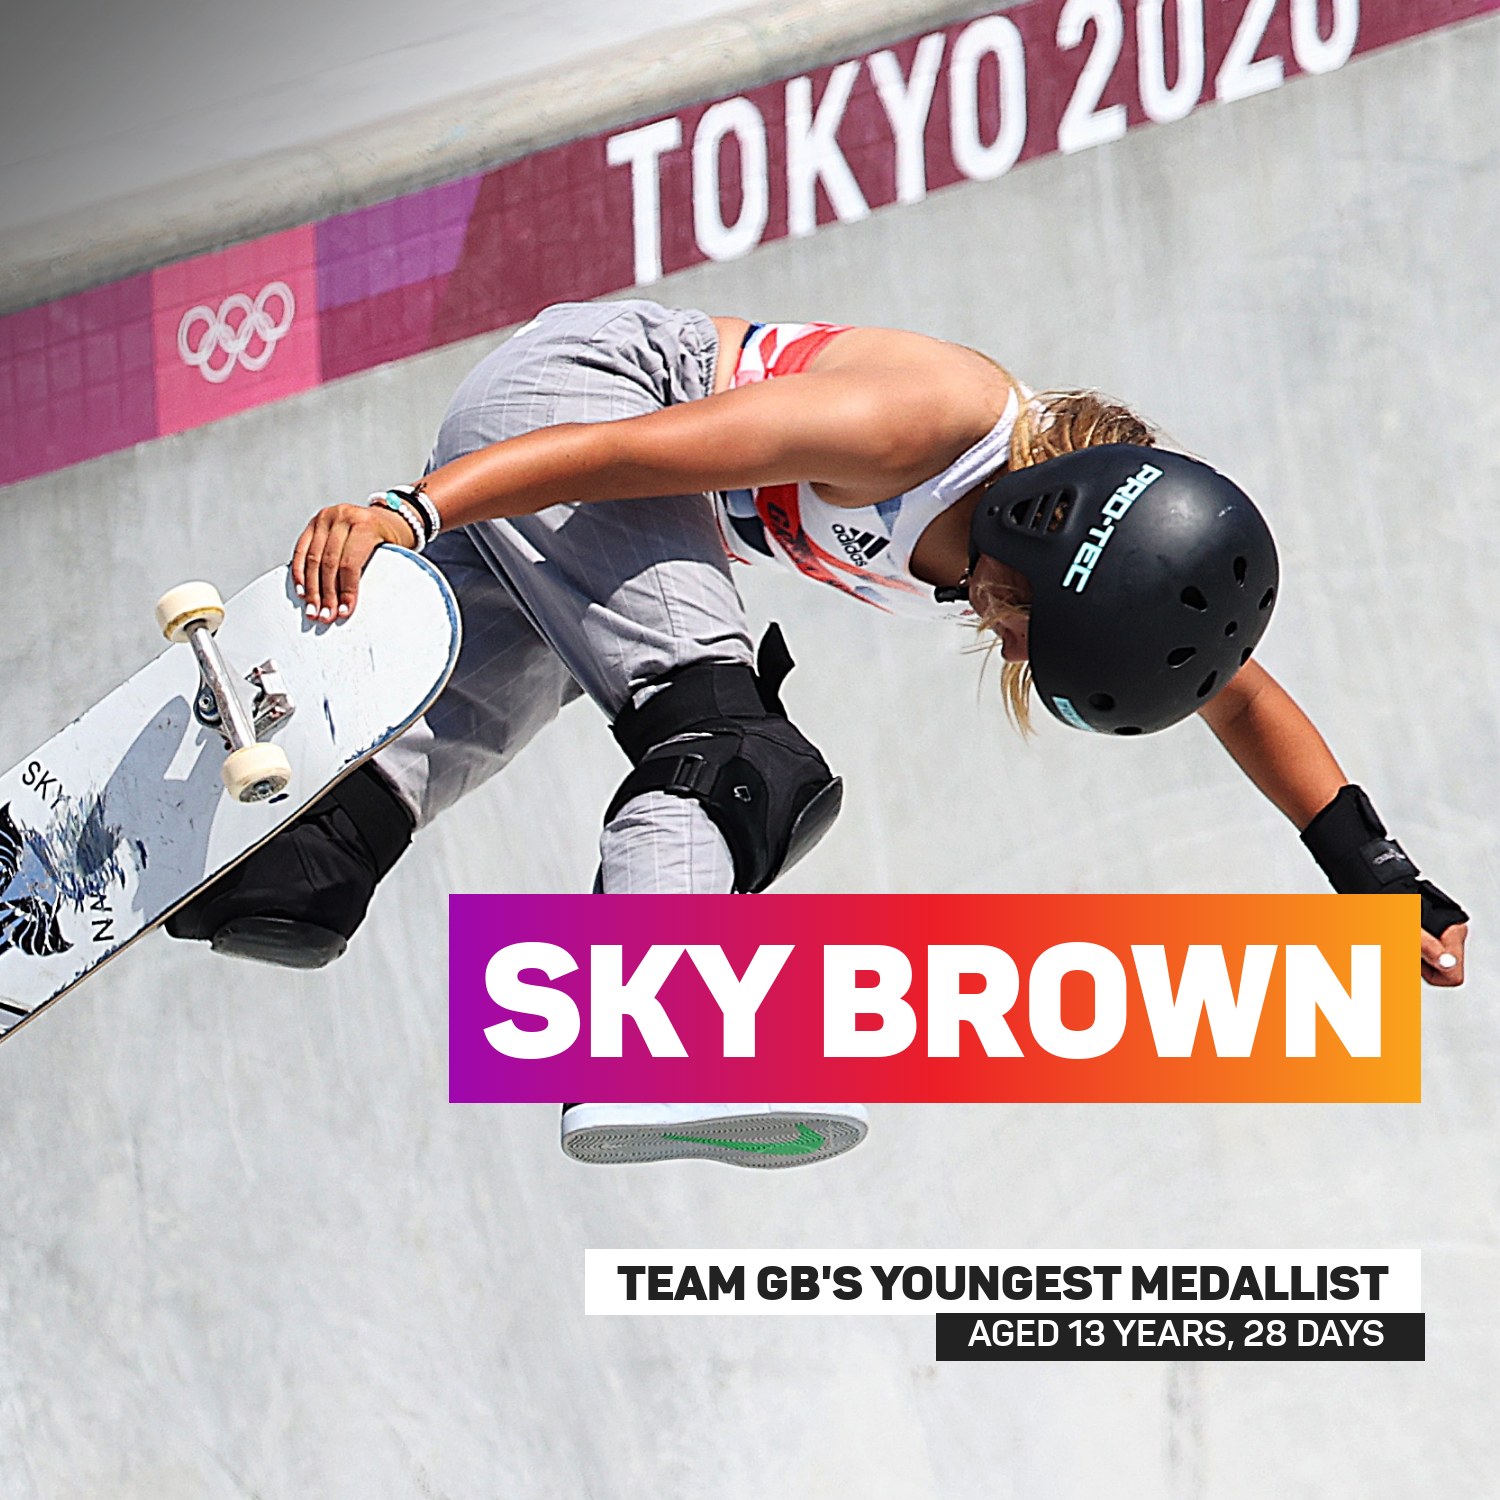 Sky Brown made history for Team GB